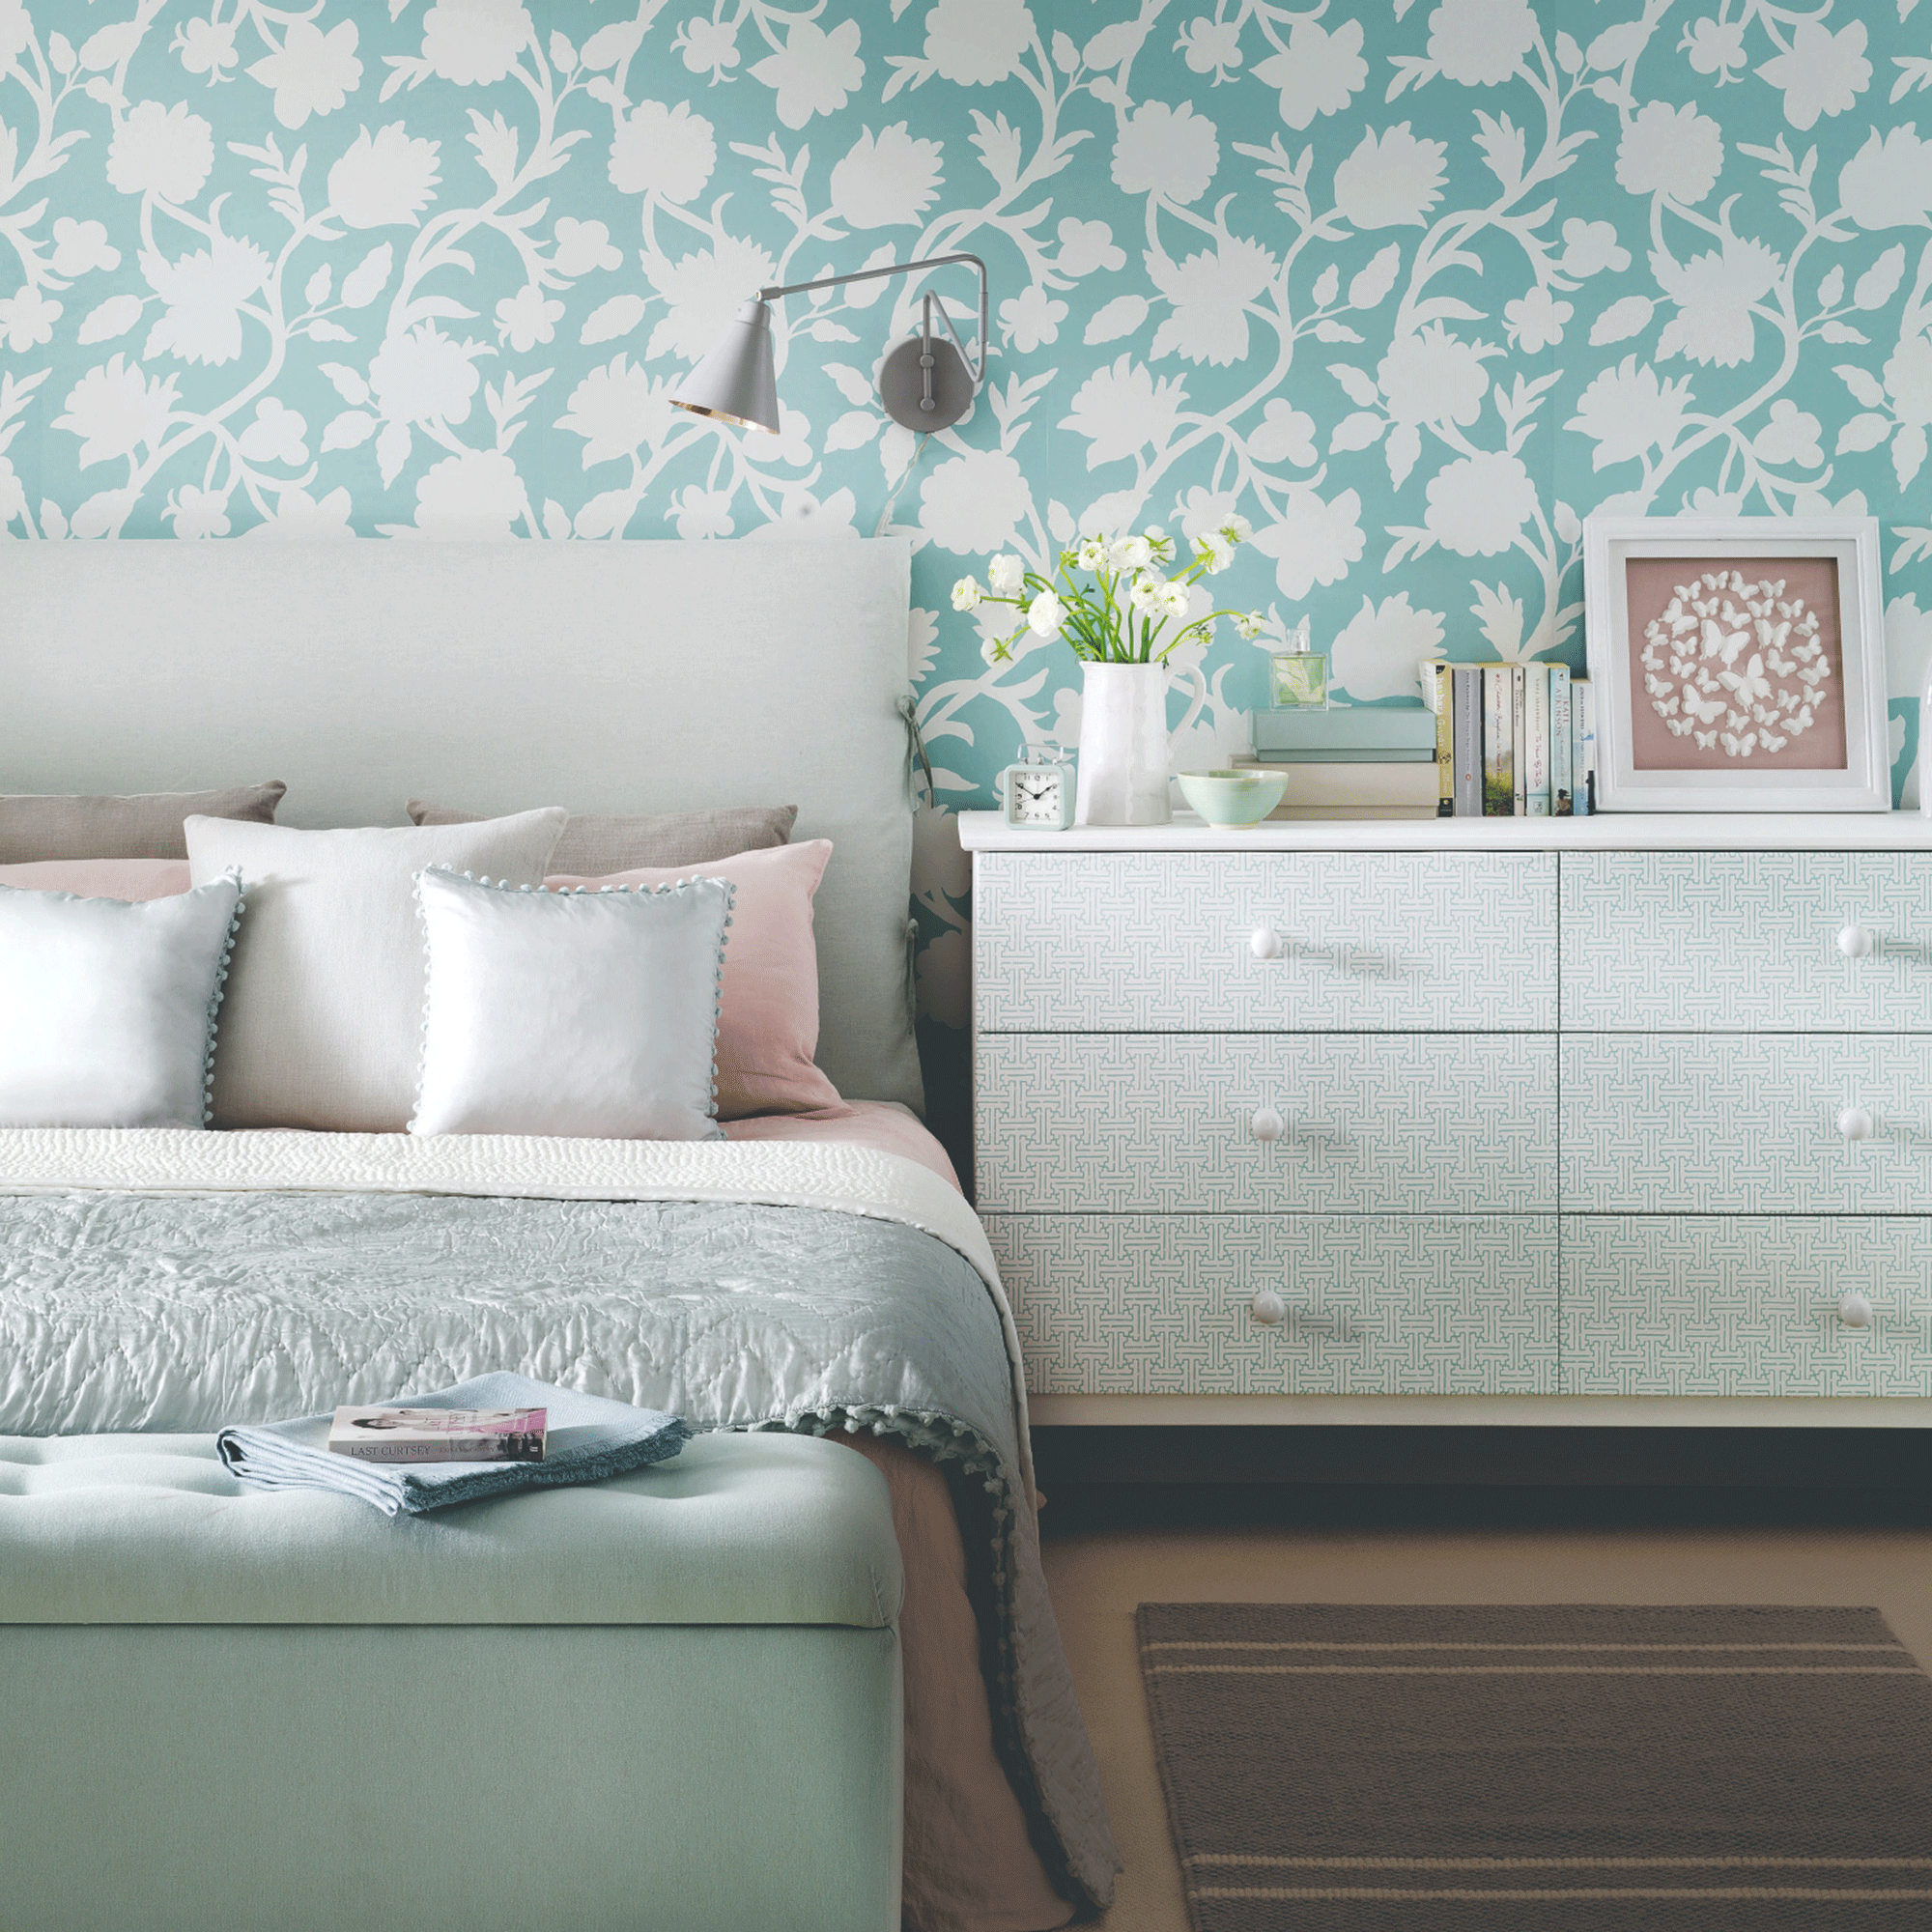 Small bedroom with blue wallpaper